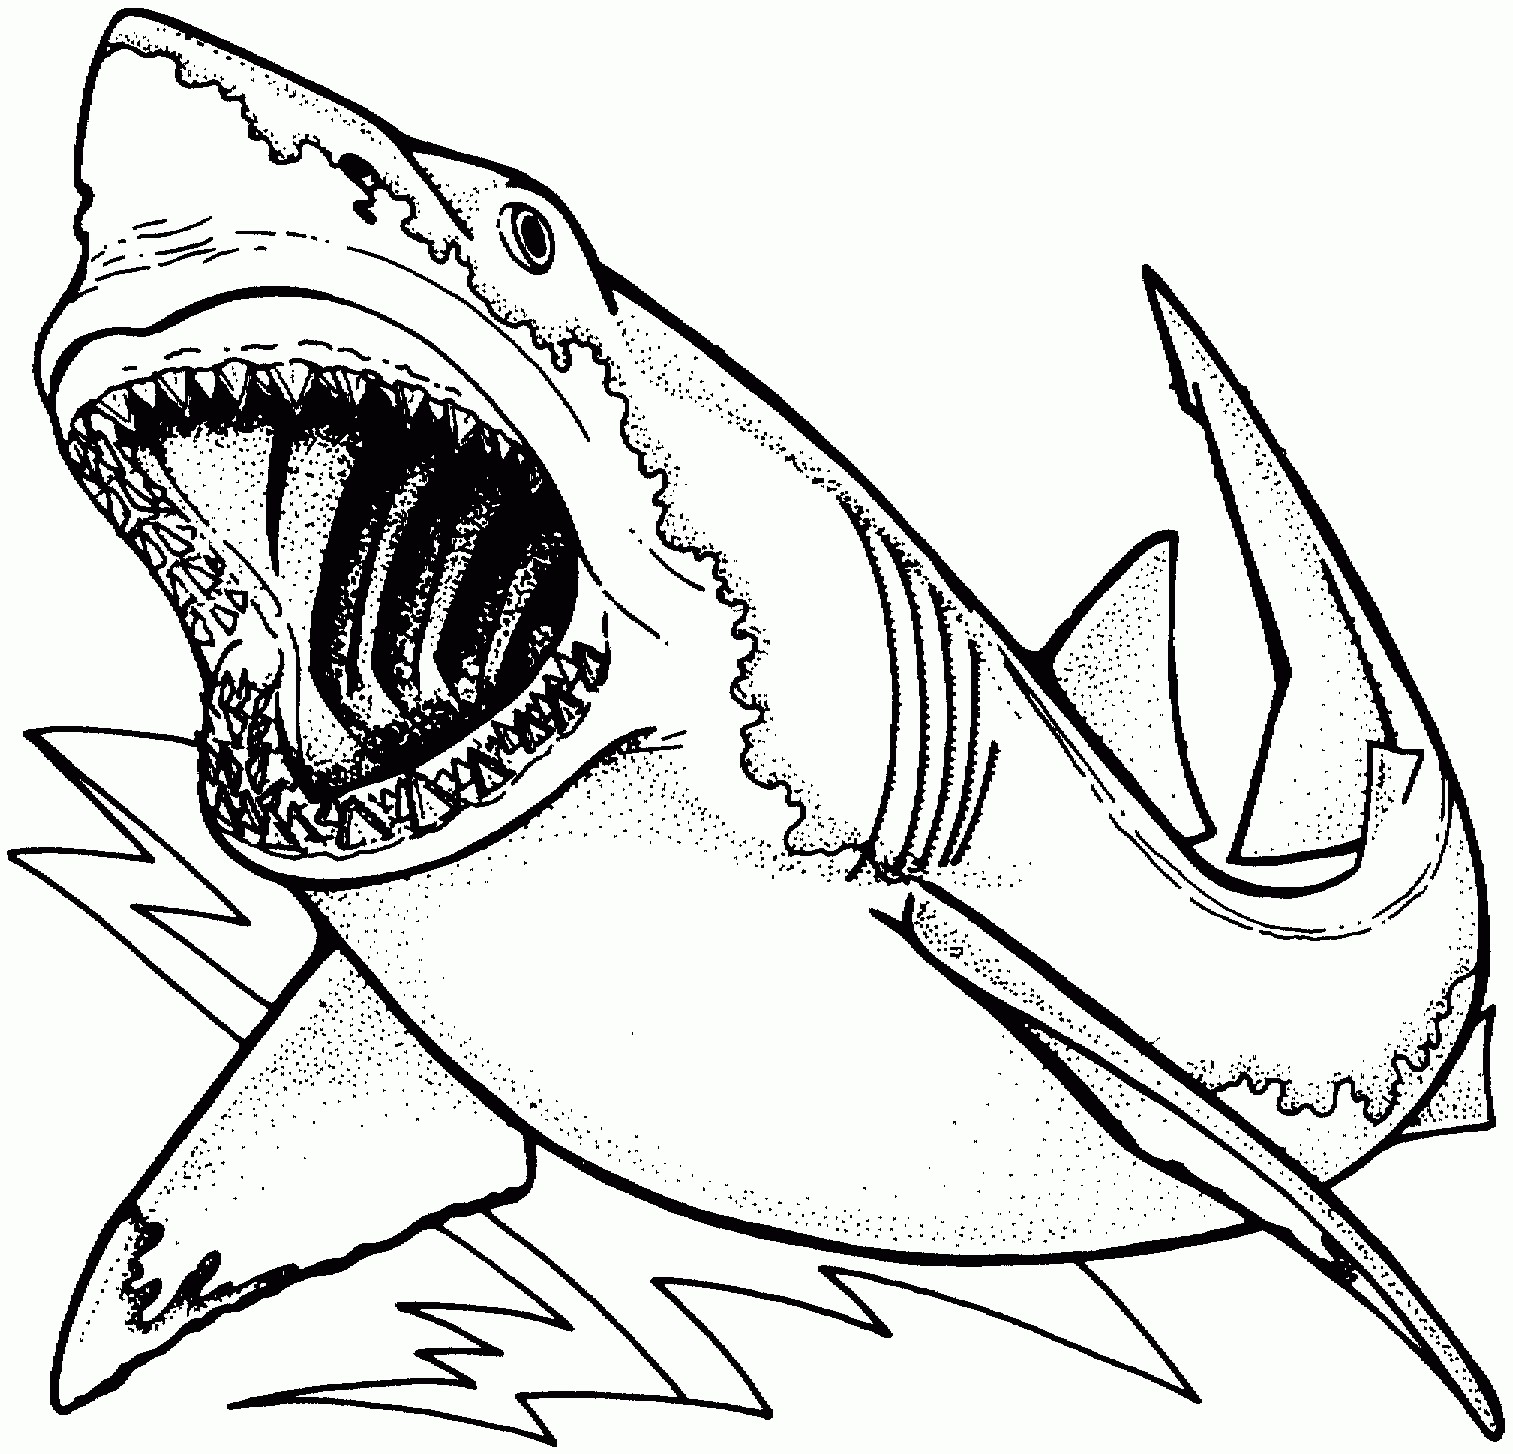 Awesome Great White Shark Coloring Page - Free Printable Coloring Pages